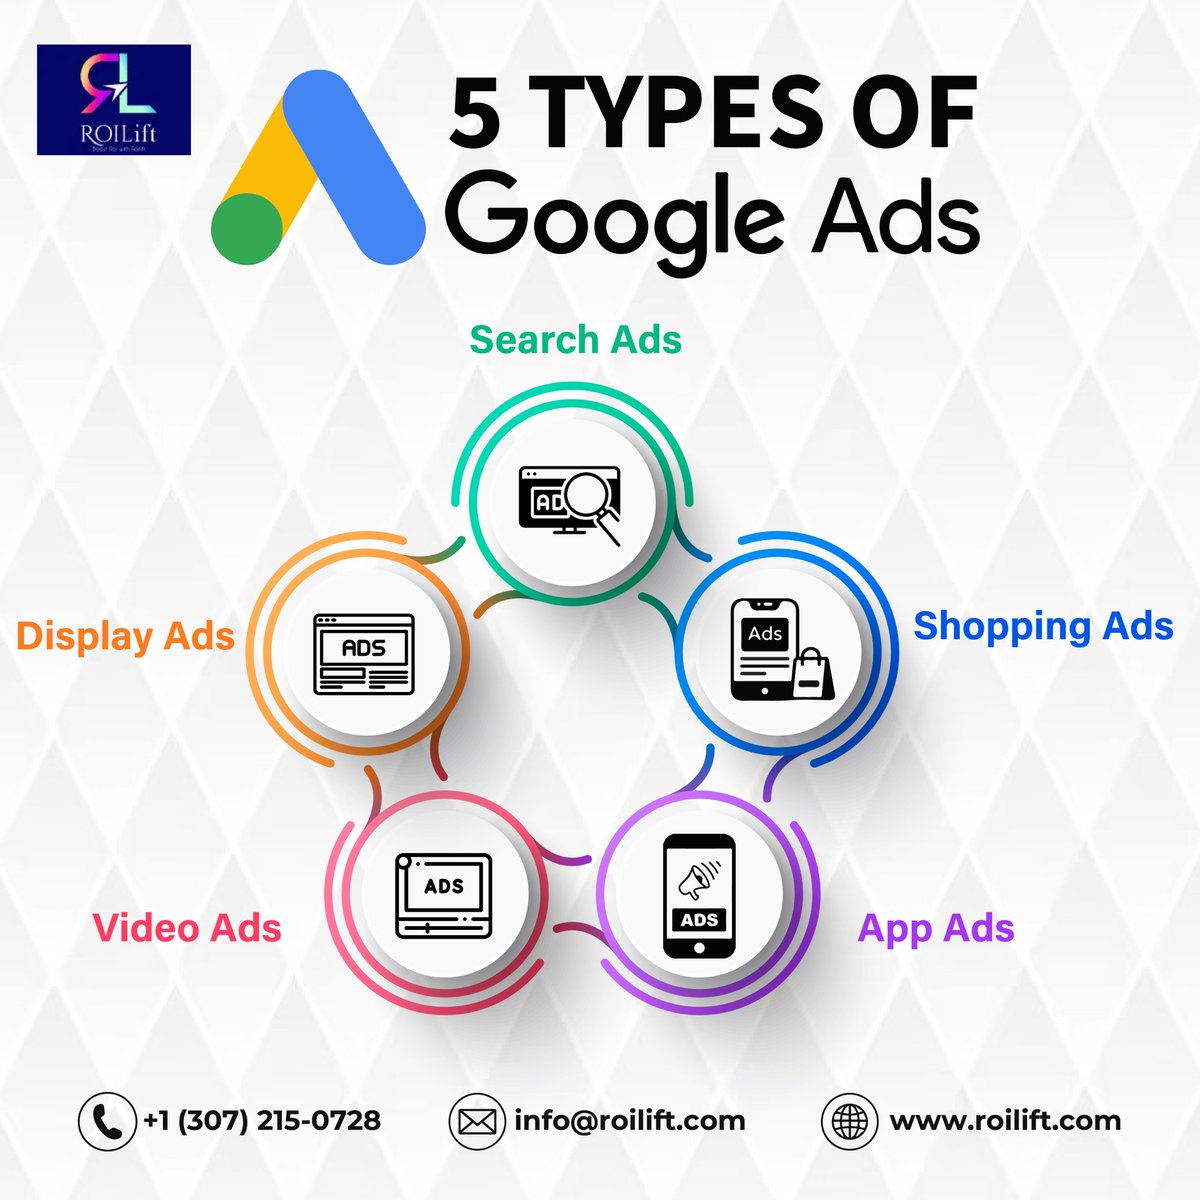 Ready to take your advertising to the next level? Contact us to learn more about how Google Ads can help you grow your business online! 💬

#GoogleAds #DigitalMarketing #OnlineAdvertising #GrowYourBusiness #RCVTechnologies